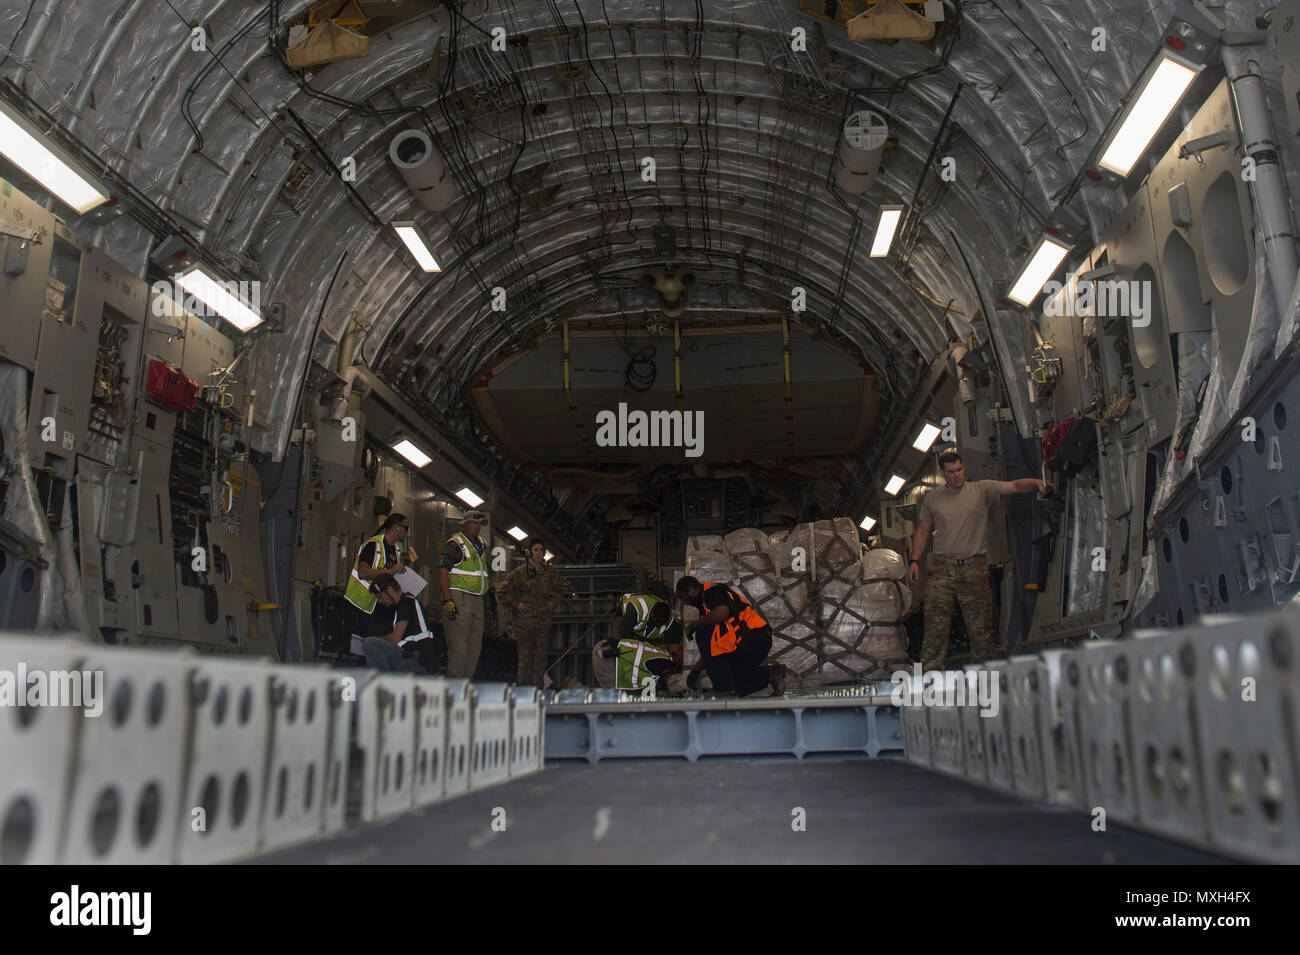 Member of the 455th Expeditionary Logistics Readiness Squadron unload pallets out of an 816th Expeditionary Airlift Squadron C-17 Globemaster III in support of Operation Freedom’s Sentinel Nov. 3, 2016. The operation focuses on training, advising, and assisting the Afghan Security Institutions and Afghan National Defense and Security Forces in order to build their capabilities and long-term sustainability. (U.S. Air Force photo by Staff Sgt. Matthew B. Fredericks) Stock Photo